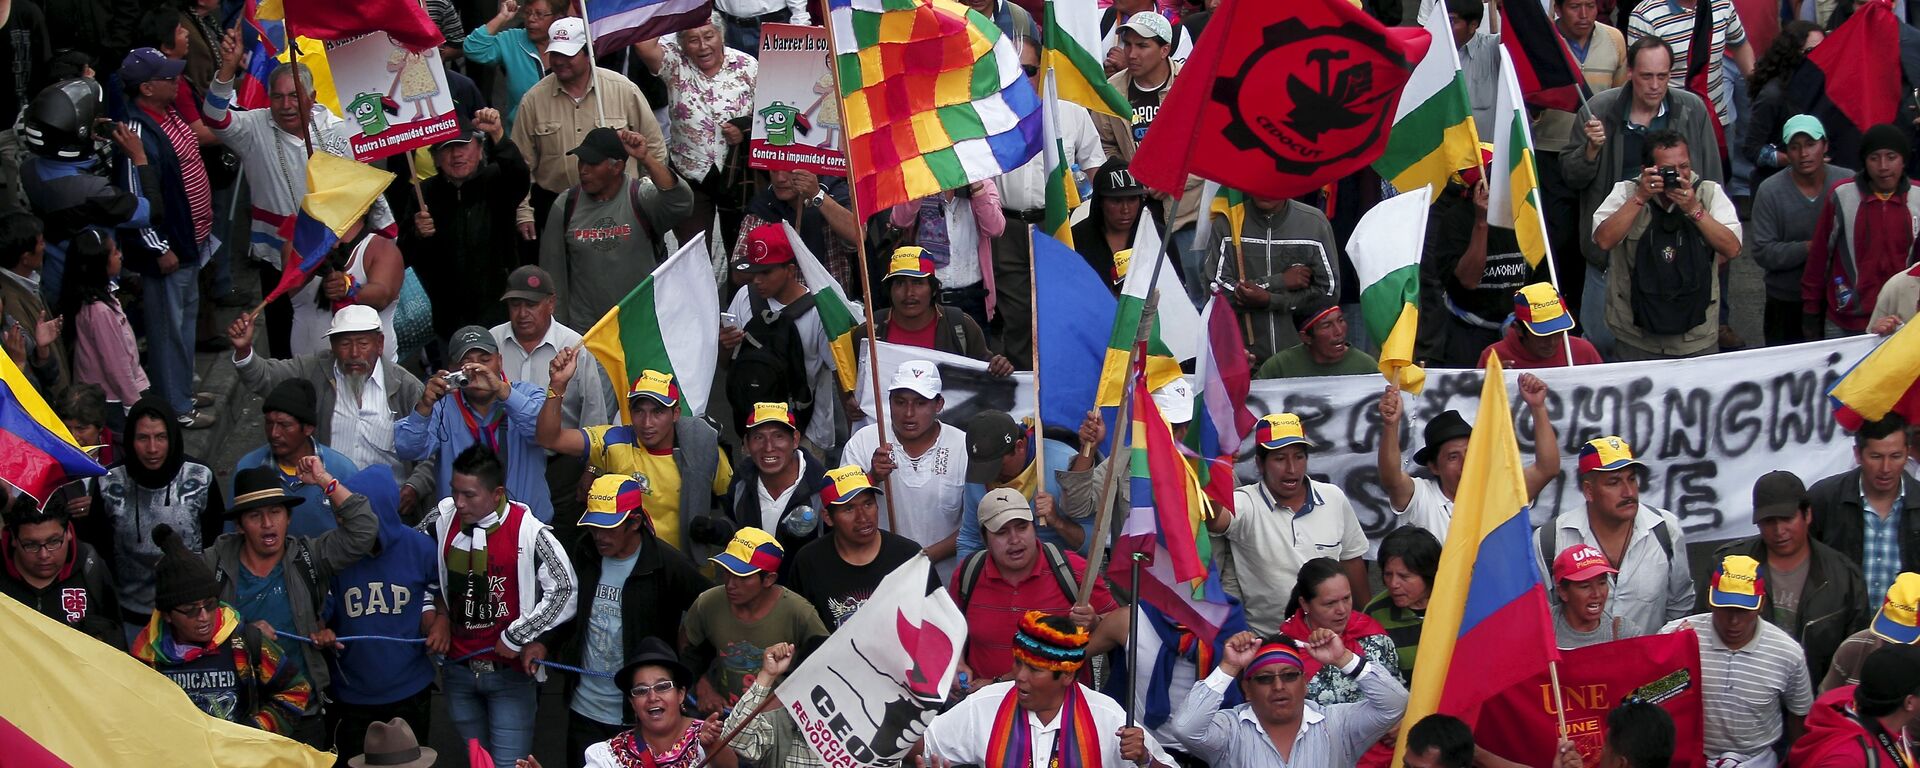 Protesters carry flags and banners while marching in Quito, Ecuador, August 12, 2015 - Sputnik Mundo, 1920, 29.10.2021